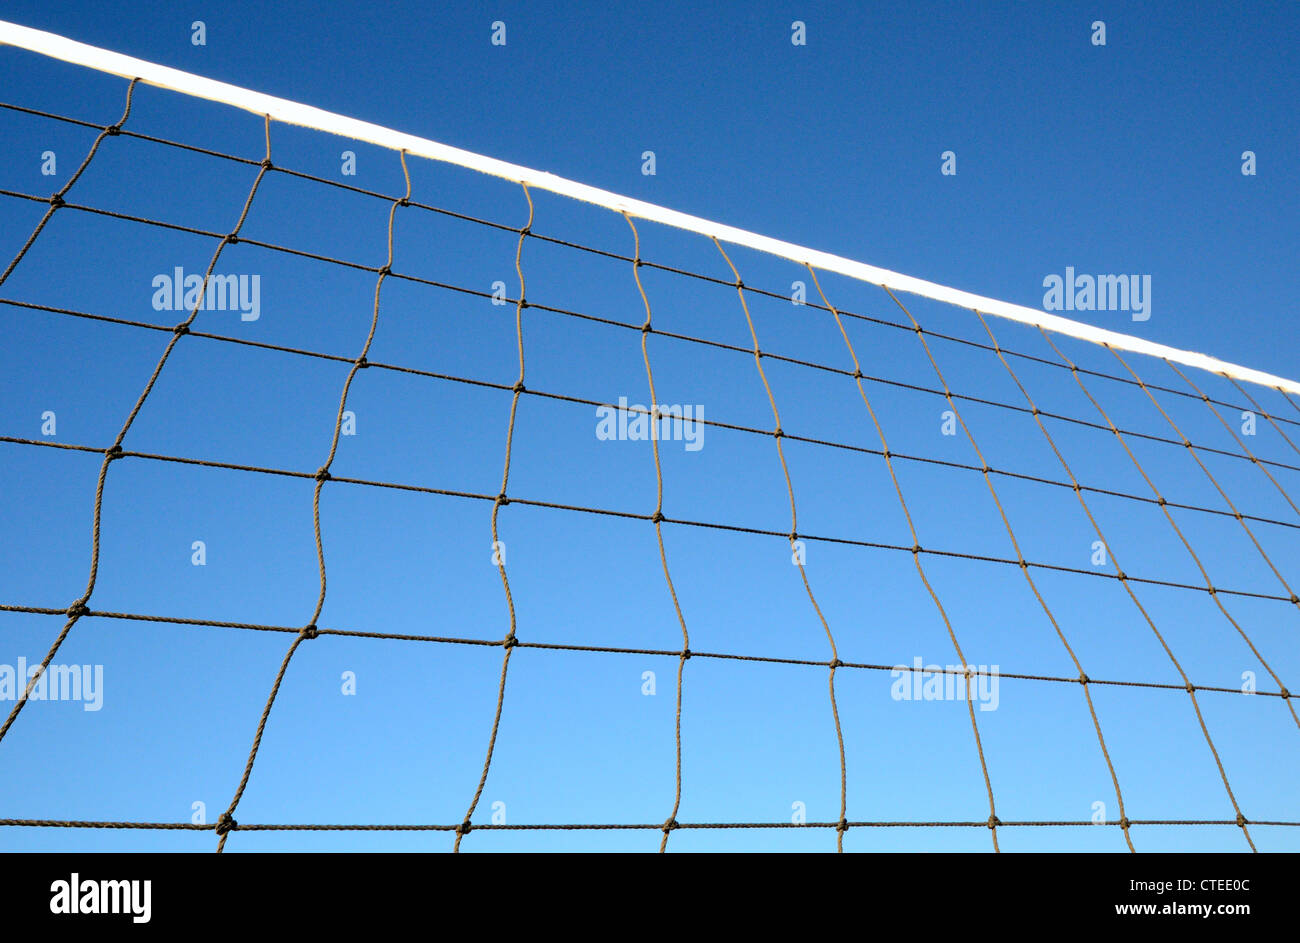 Part of volleyball net against clear blue sky Stock Photo